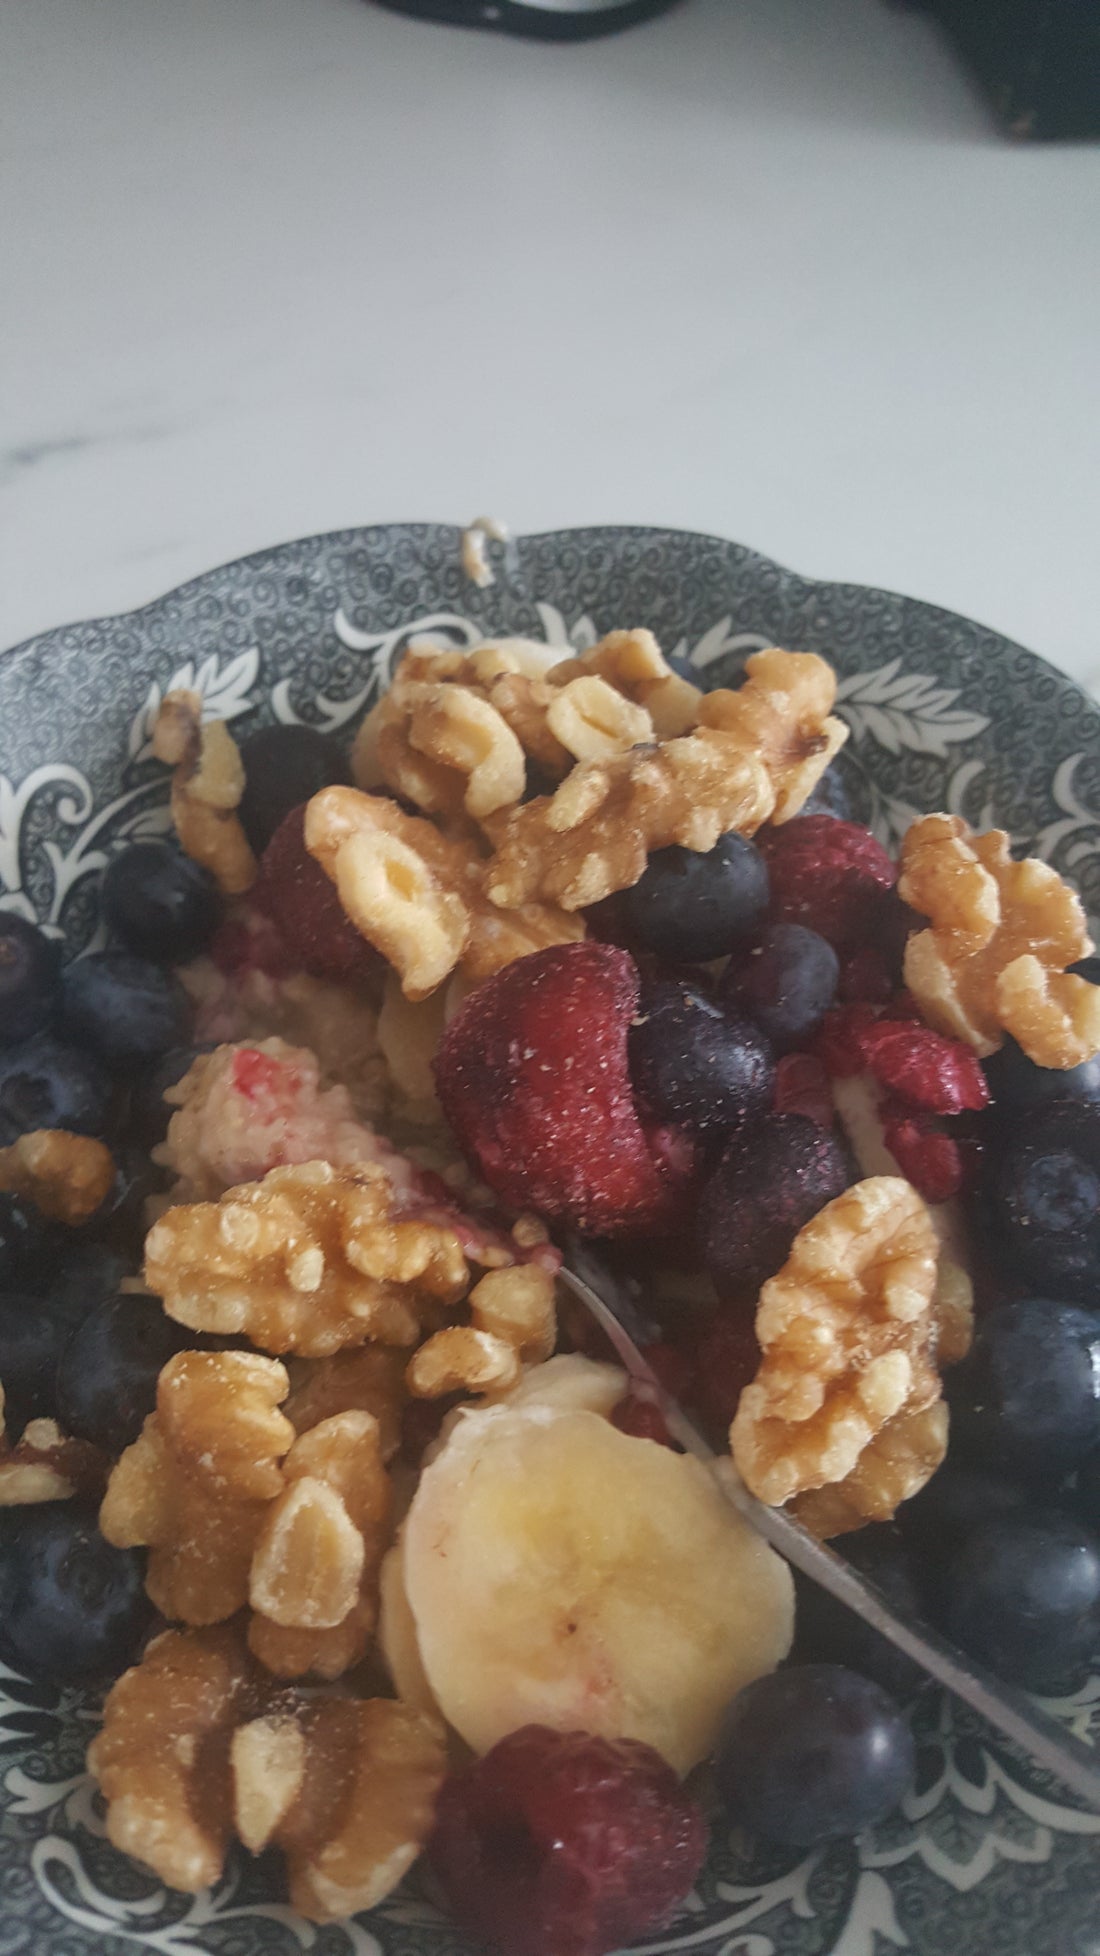 Oatmeal For Breakfast Becomes a Balanced Food Function